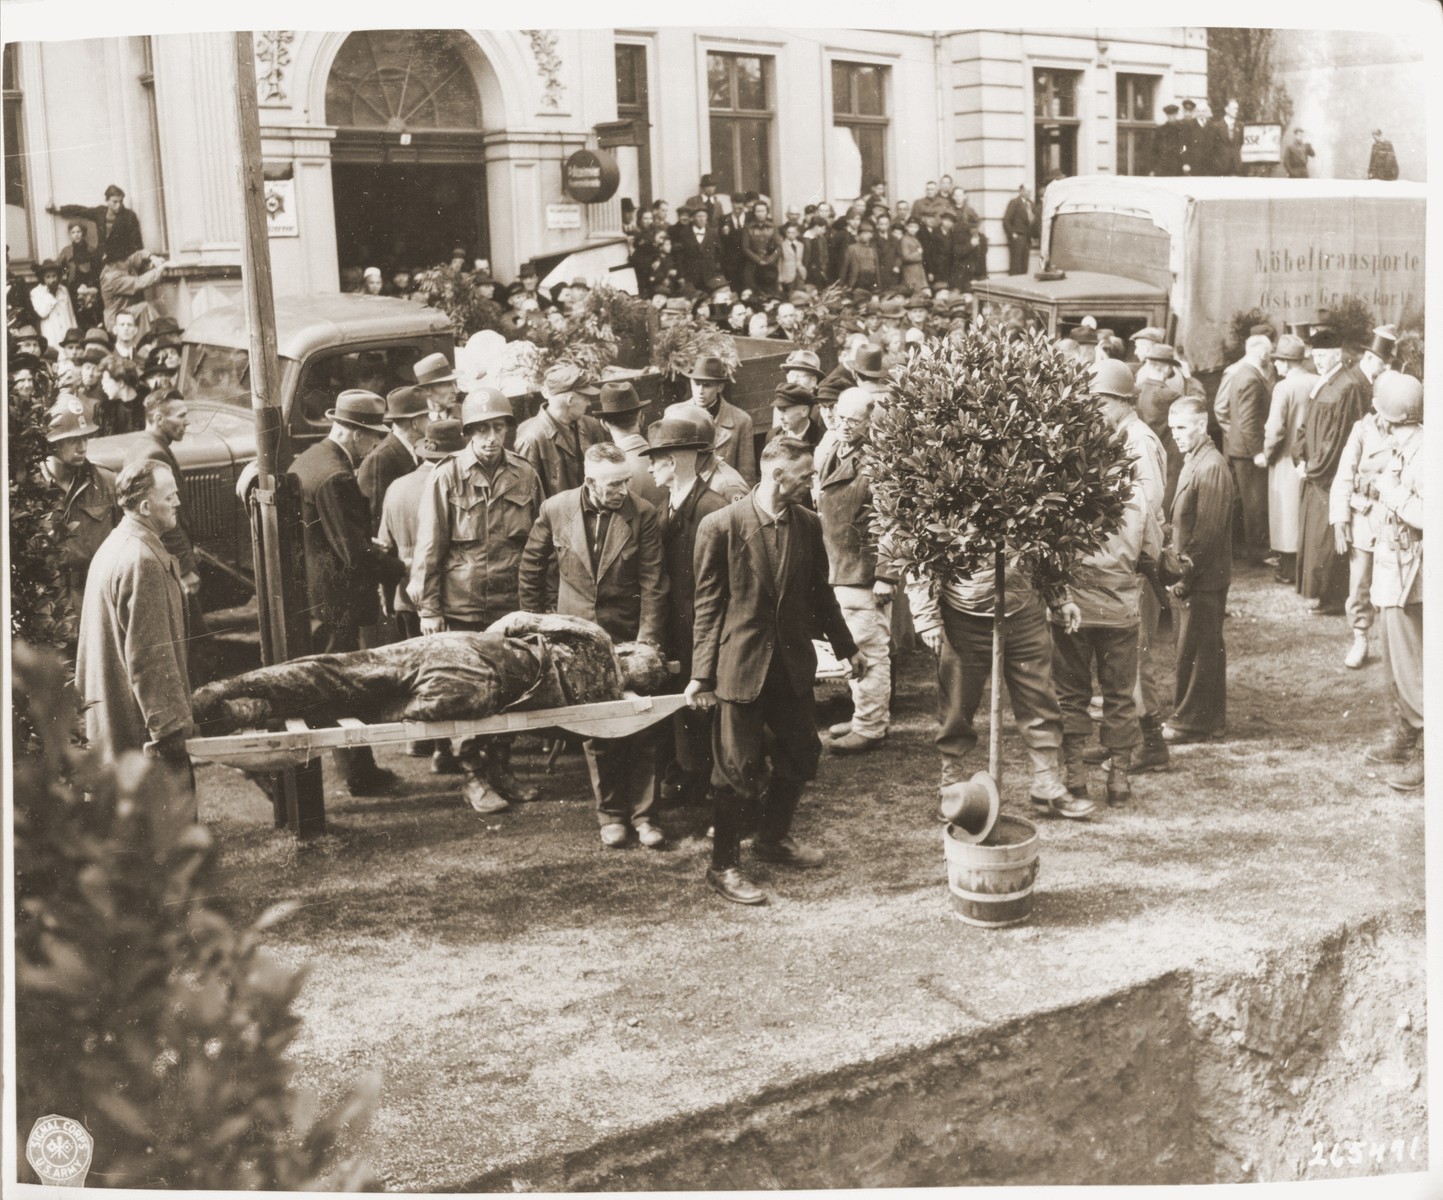 Under the supervision of American soldiers, German civilians bury the bodies of 71 political prisoners, exhumed from a mass grave near Solingen-Ohligs, in front of the city hall.  The victims, most of whom were taken from Luettringhausen prison, were shot and buried by the Gestapo following orders to eliminate all Reich enemies just before the end of the war.